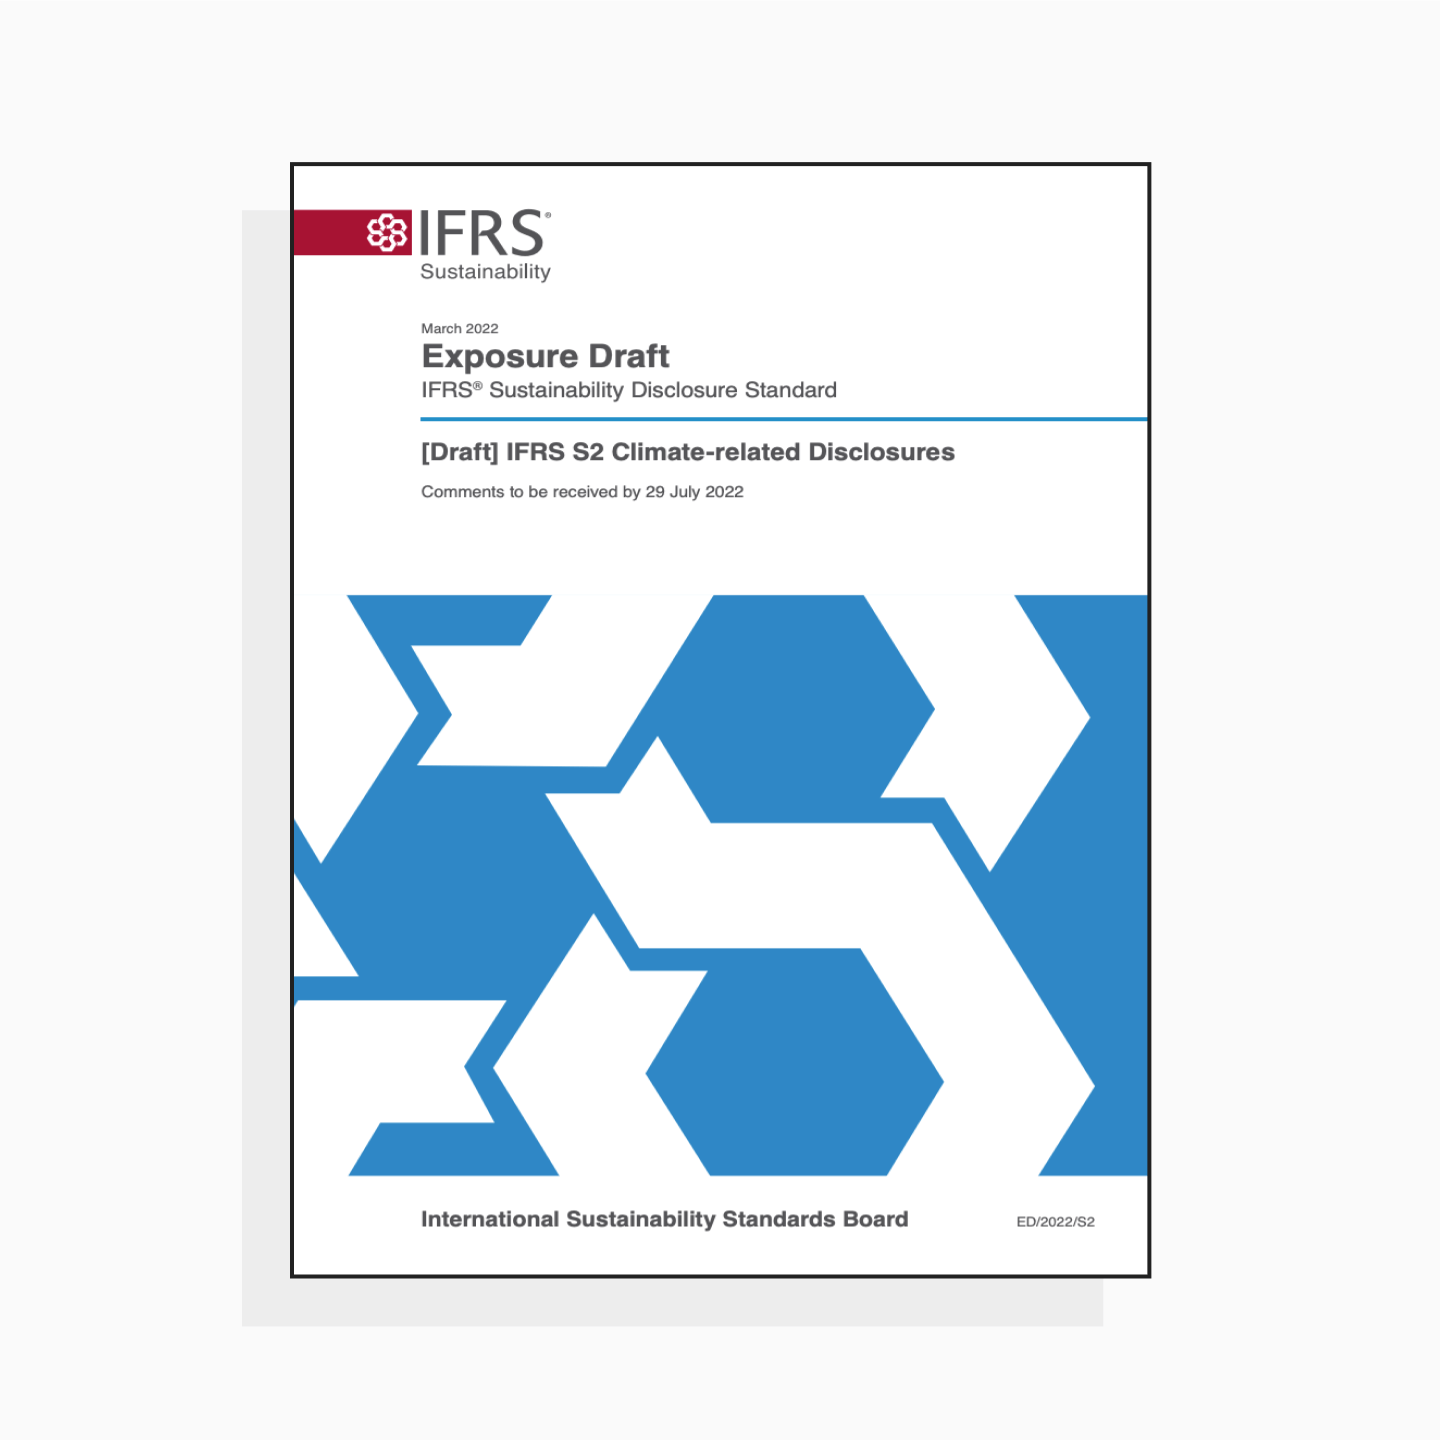 Screenshot of the front cover of IFRS Exposure Draft 2: Climate Related Disclosures